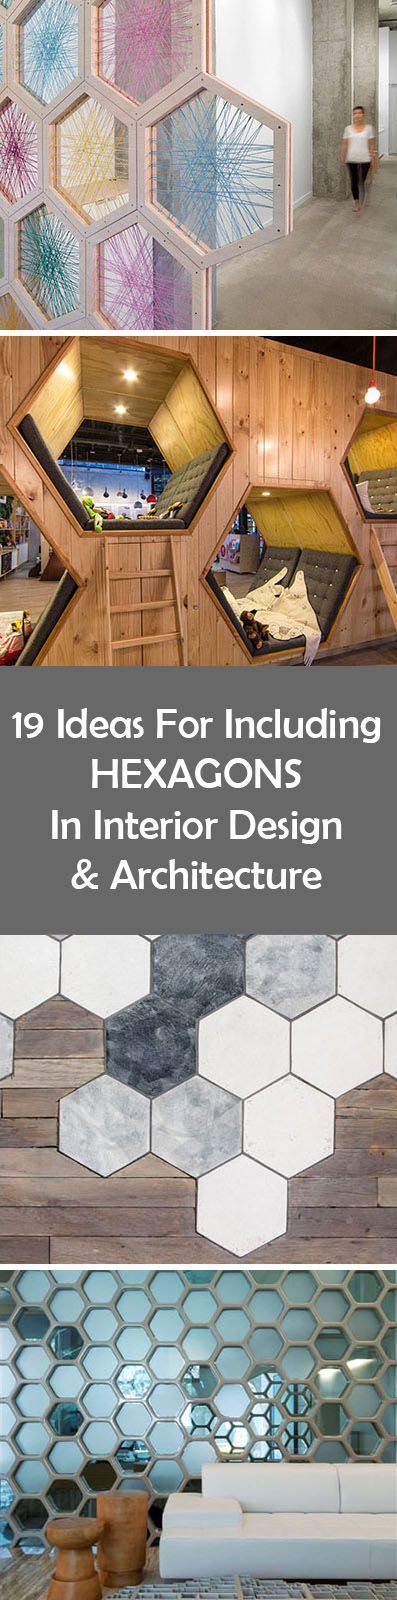 19 Ideas For Using Hexagons In Interior Design And Architecture // 